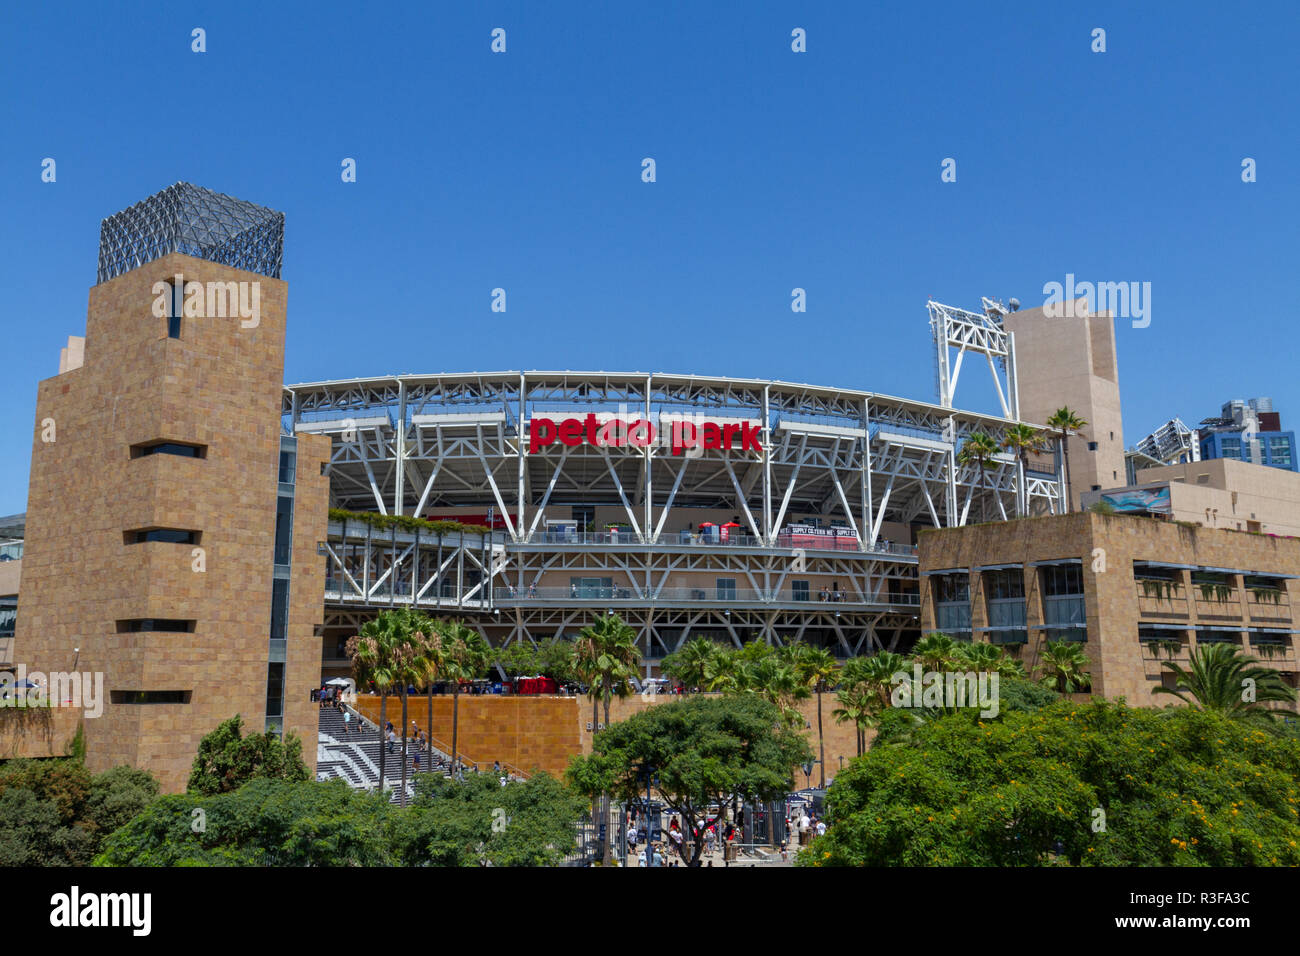 Petco Park, home of the San Diego Padres baseball team, on game day, San Diego, CA, USA. Stock Photo